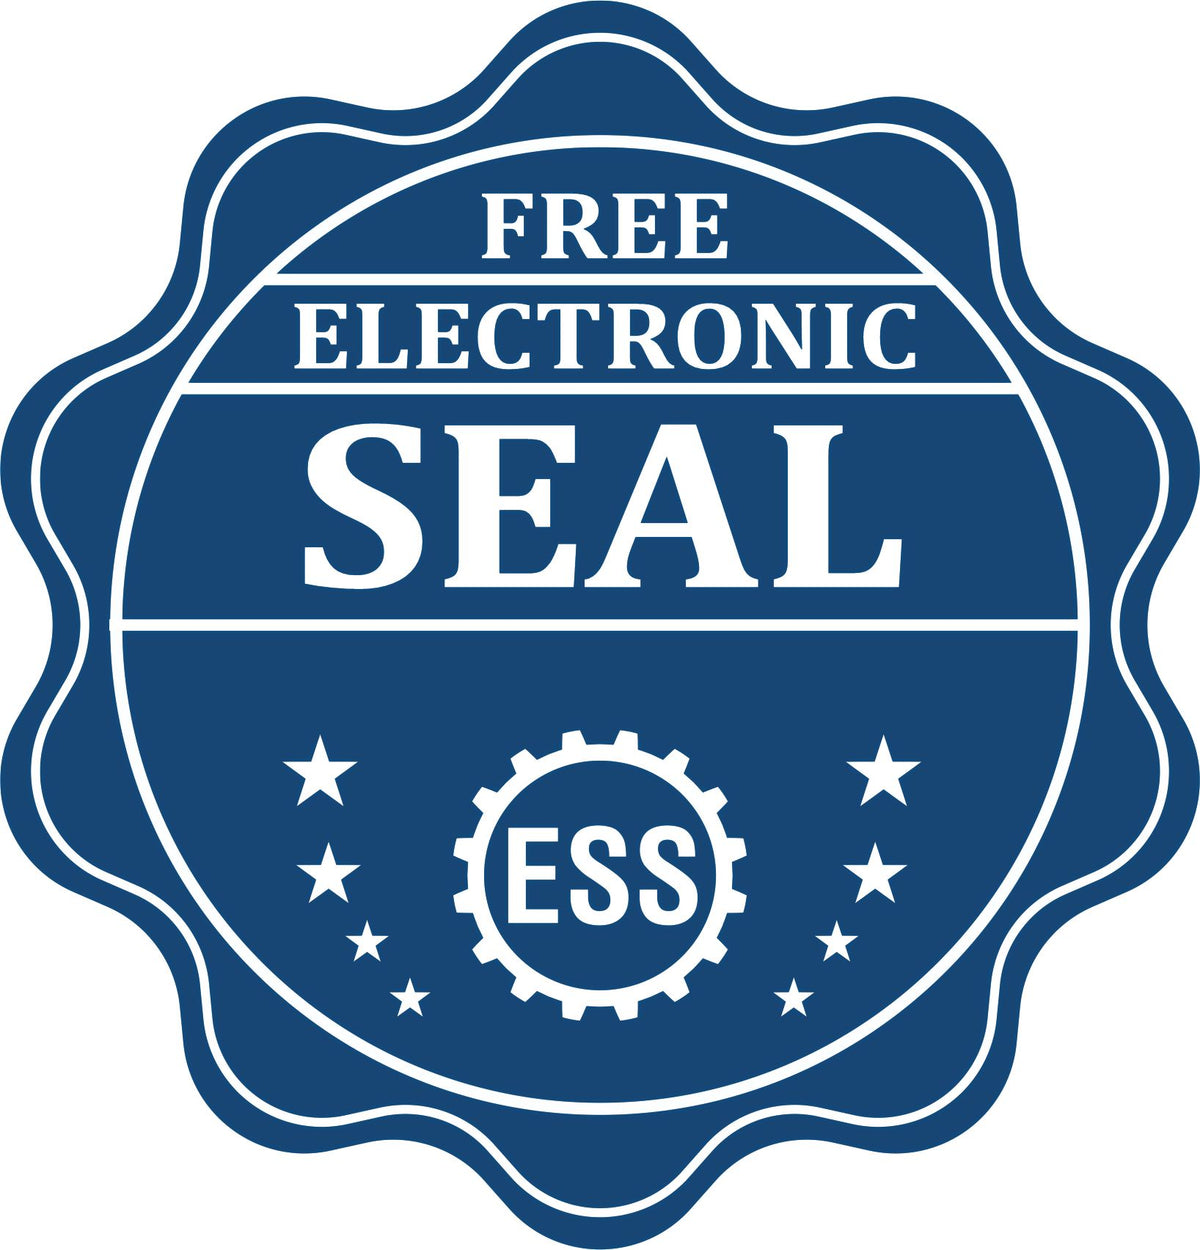 A badge showing a free electronic seal for the Premium MaxLight Pre-Inked Hawaii Landscape Architectural Stamp with stars and the ESS gear on the emblem.